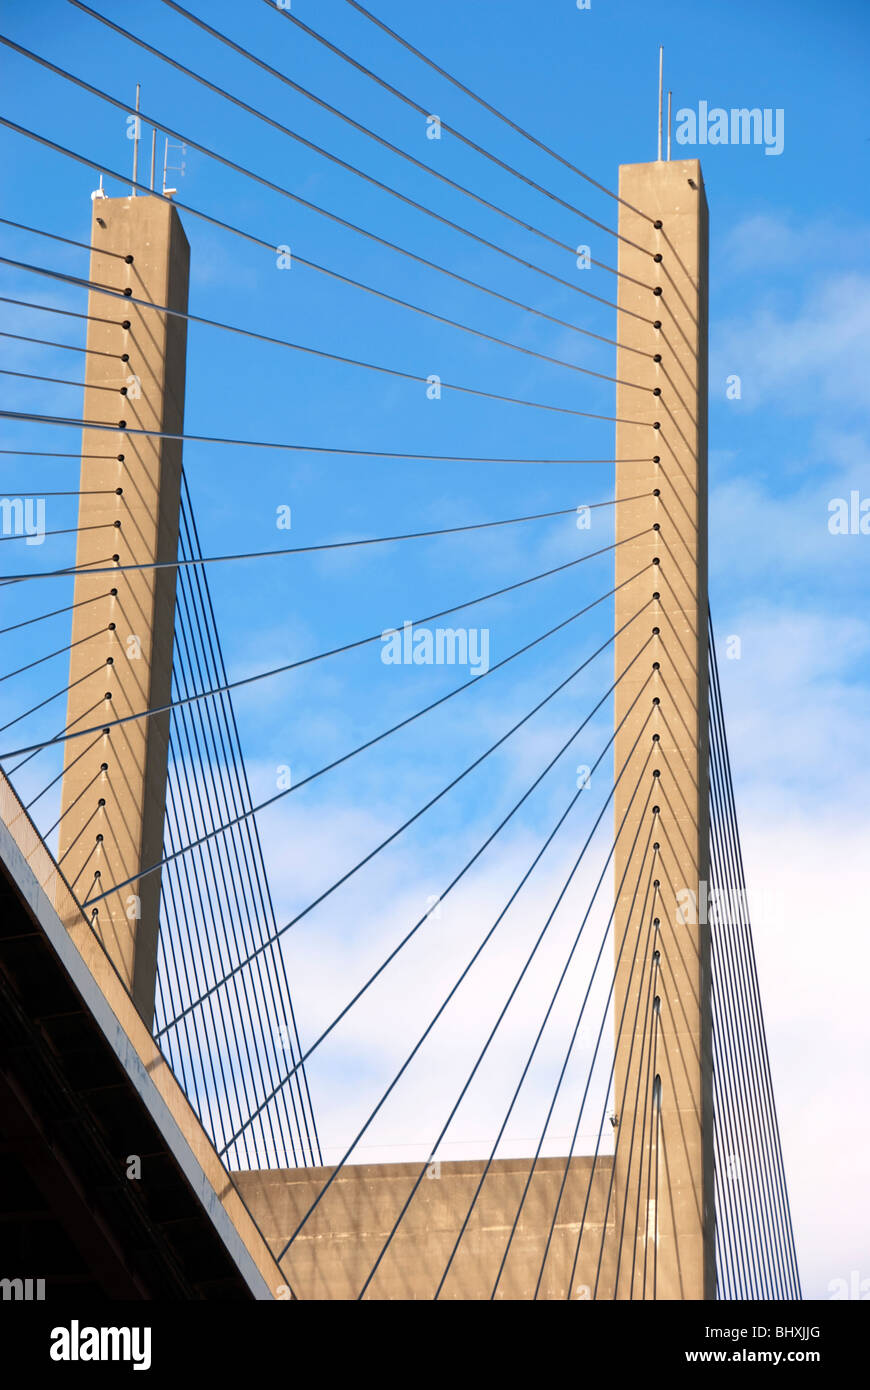 Symmetric patterns and shapes of a suspension bridge. Stock Photo